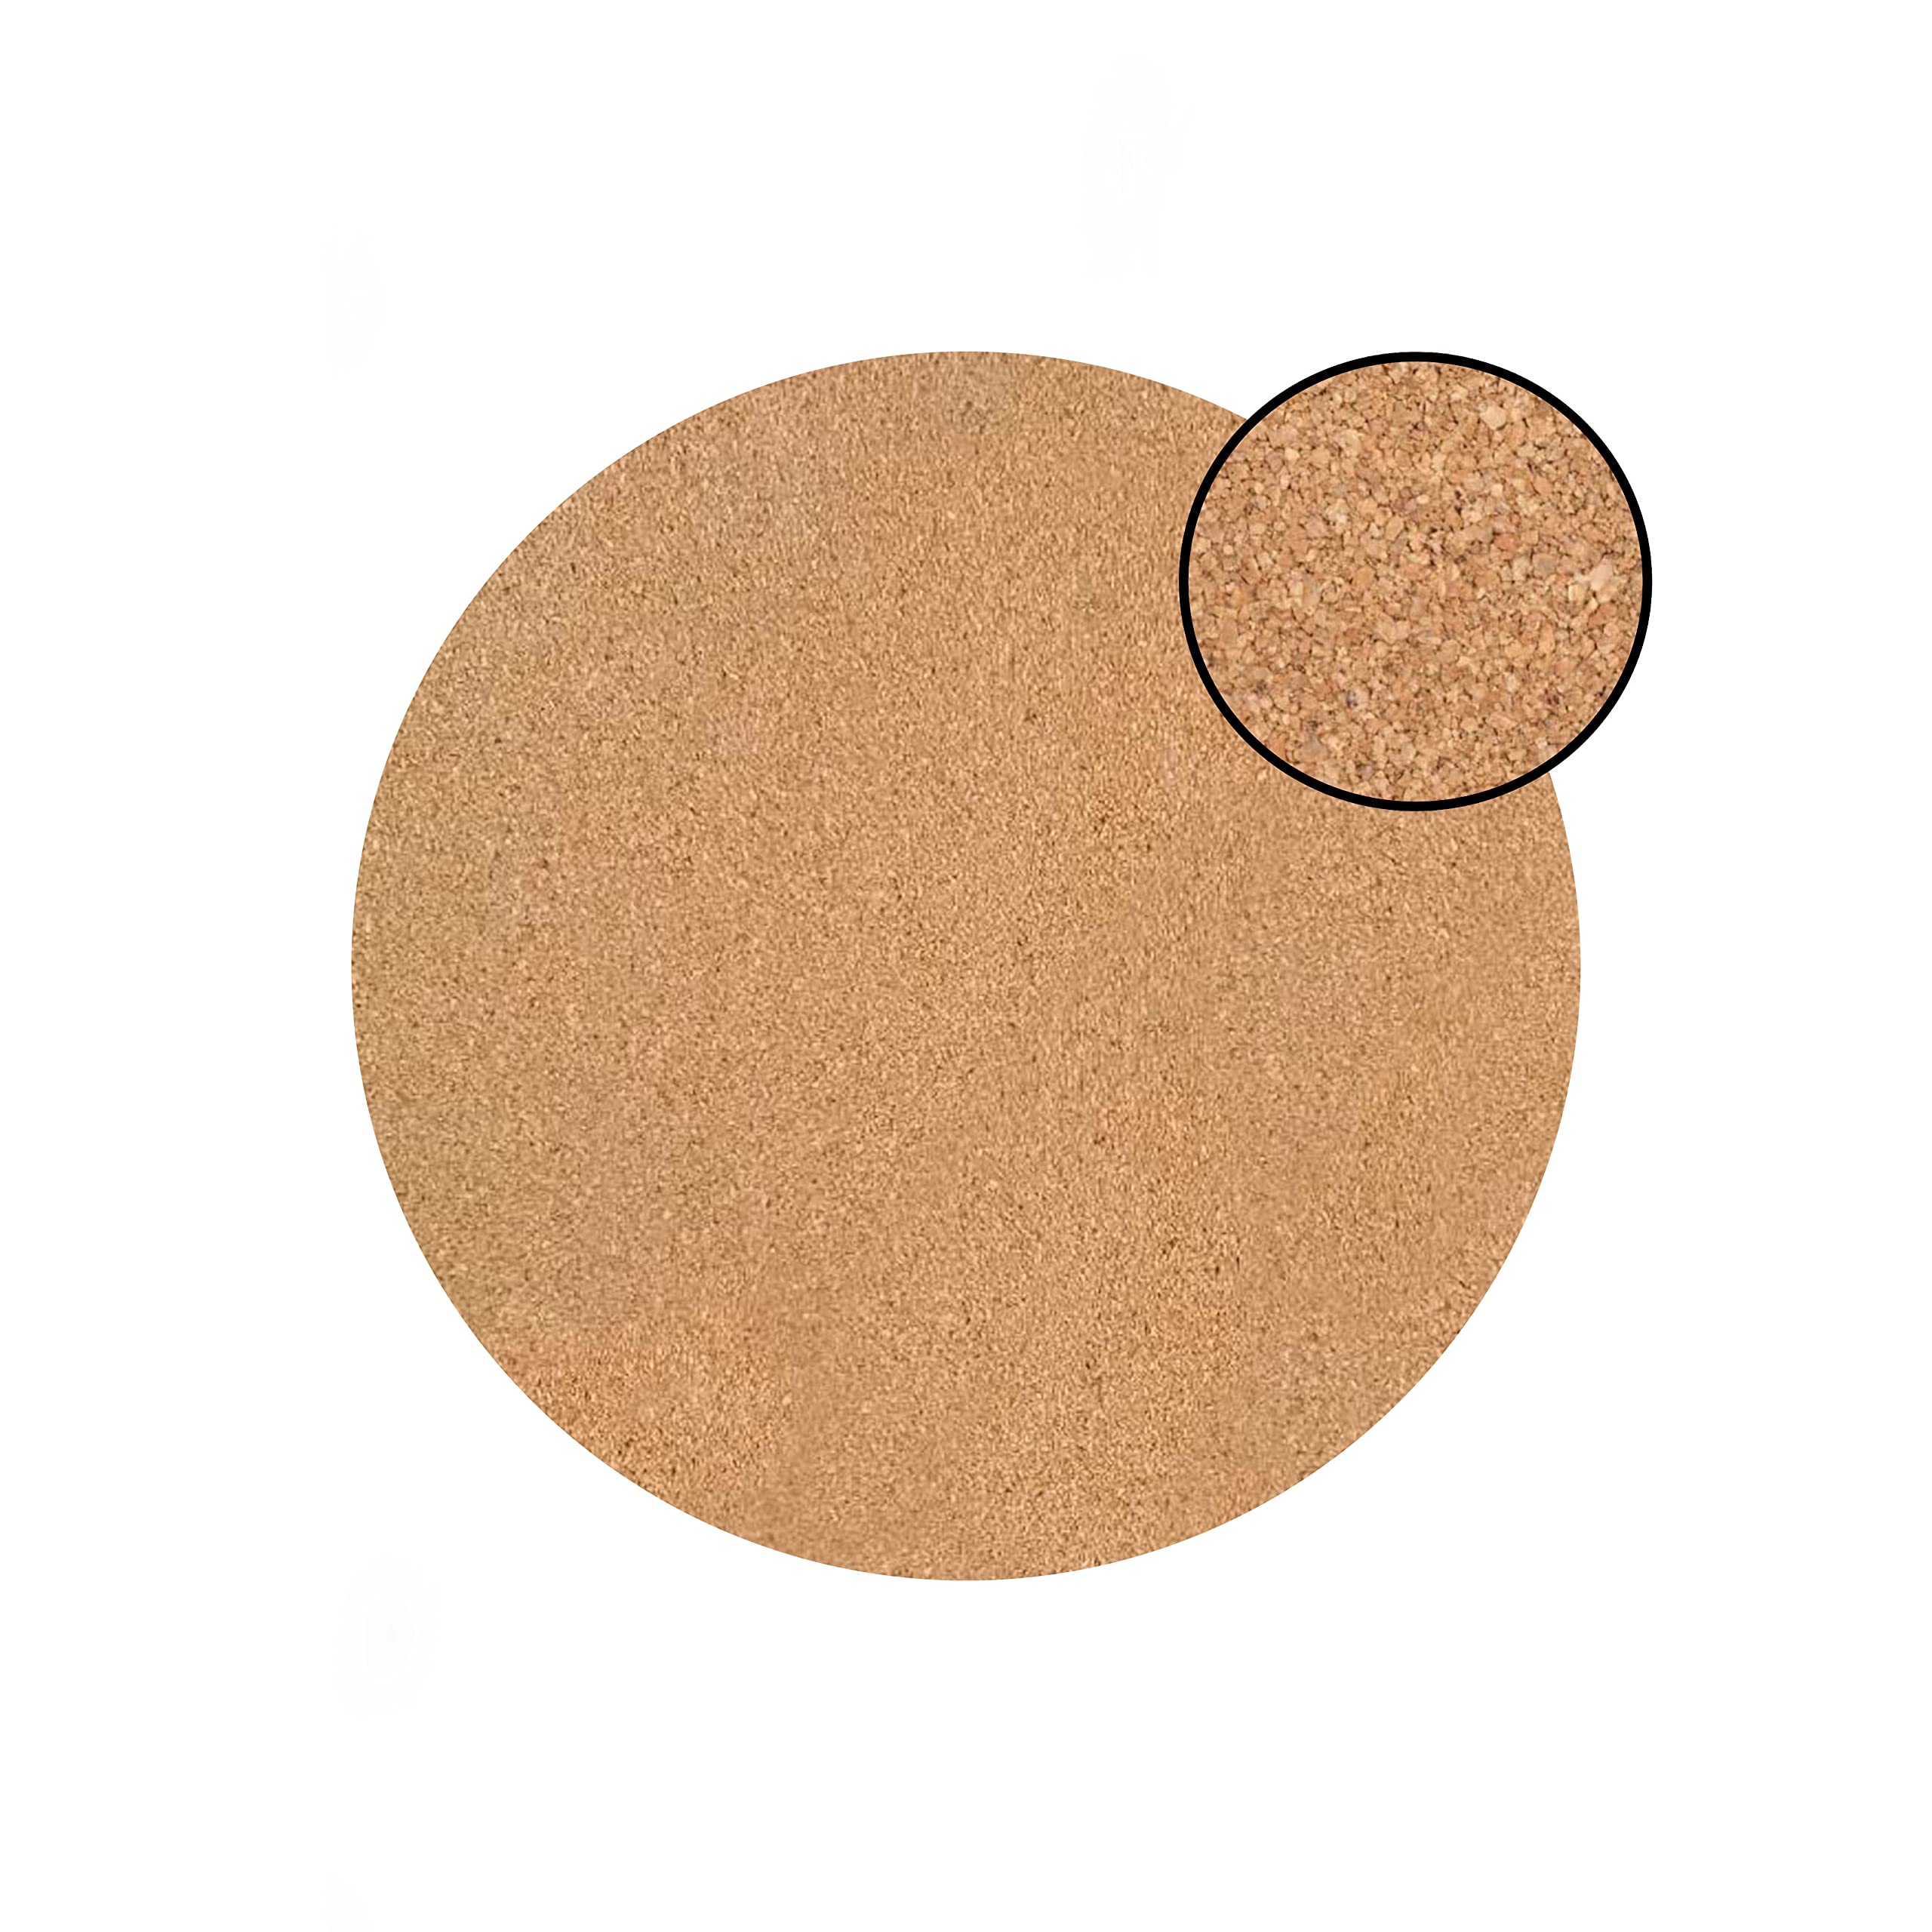 Dainty Home Marble Cork Place Mats Round Rose Gold 15